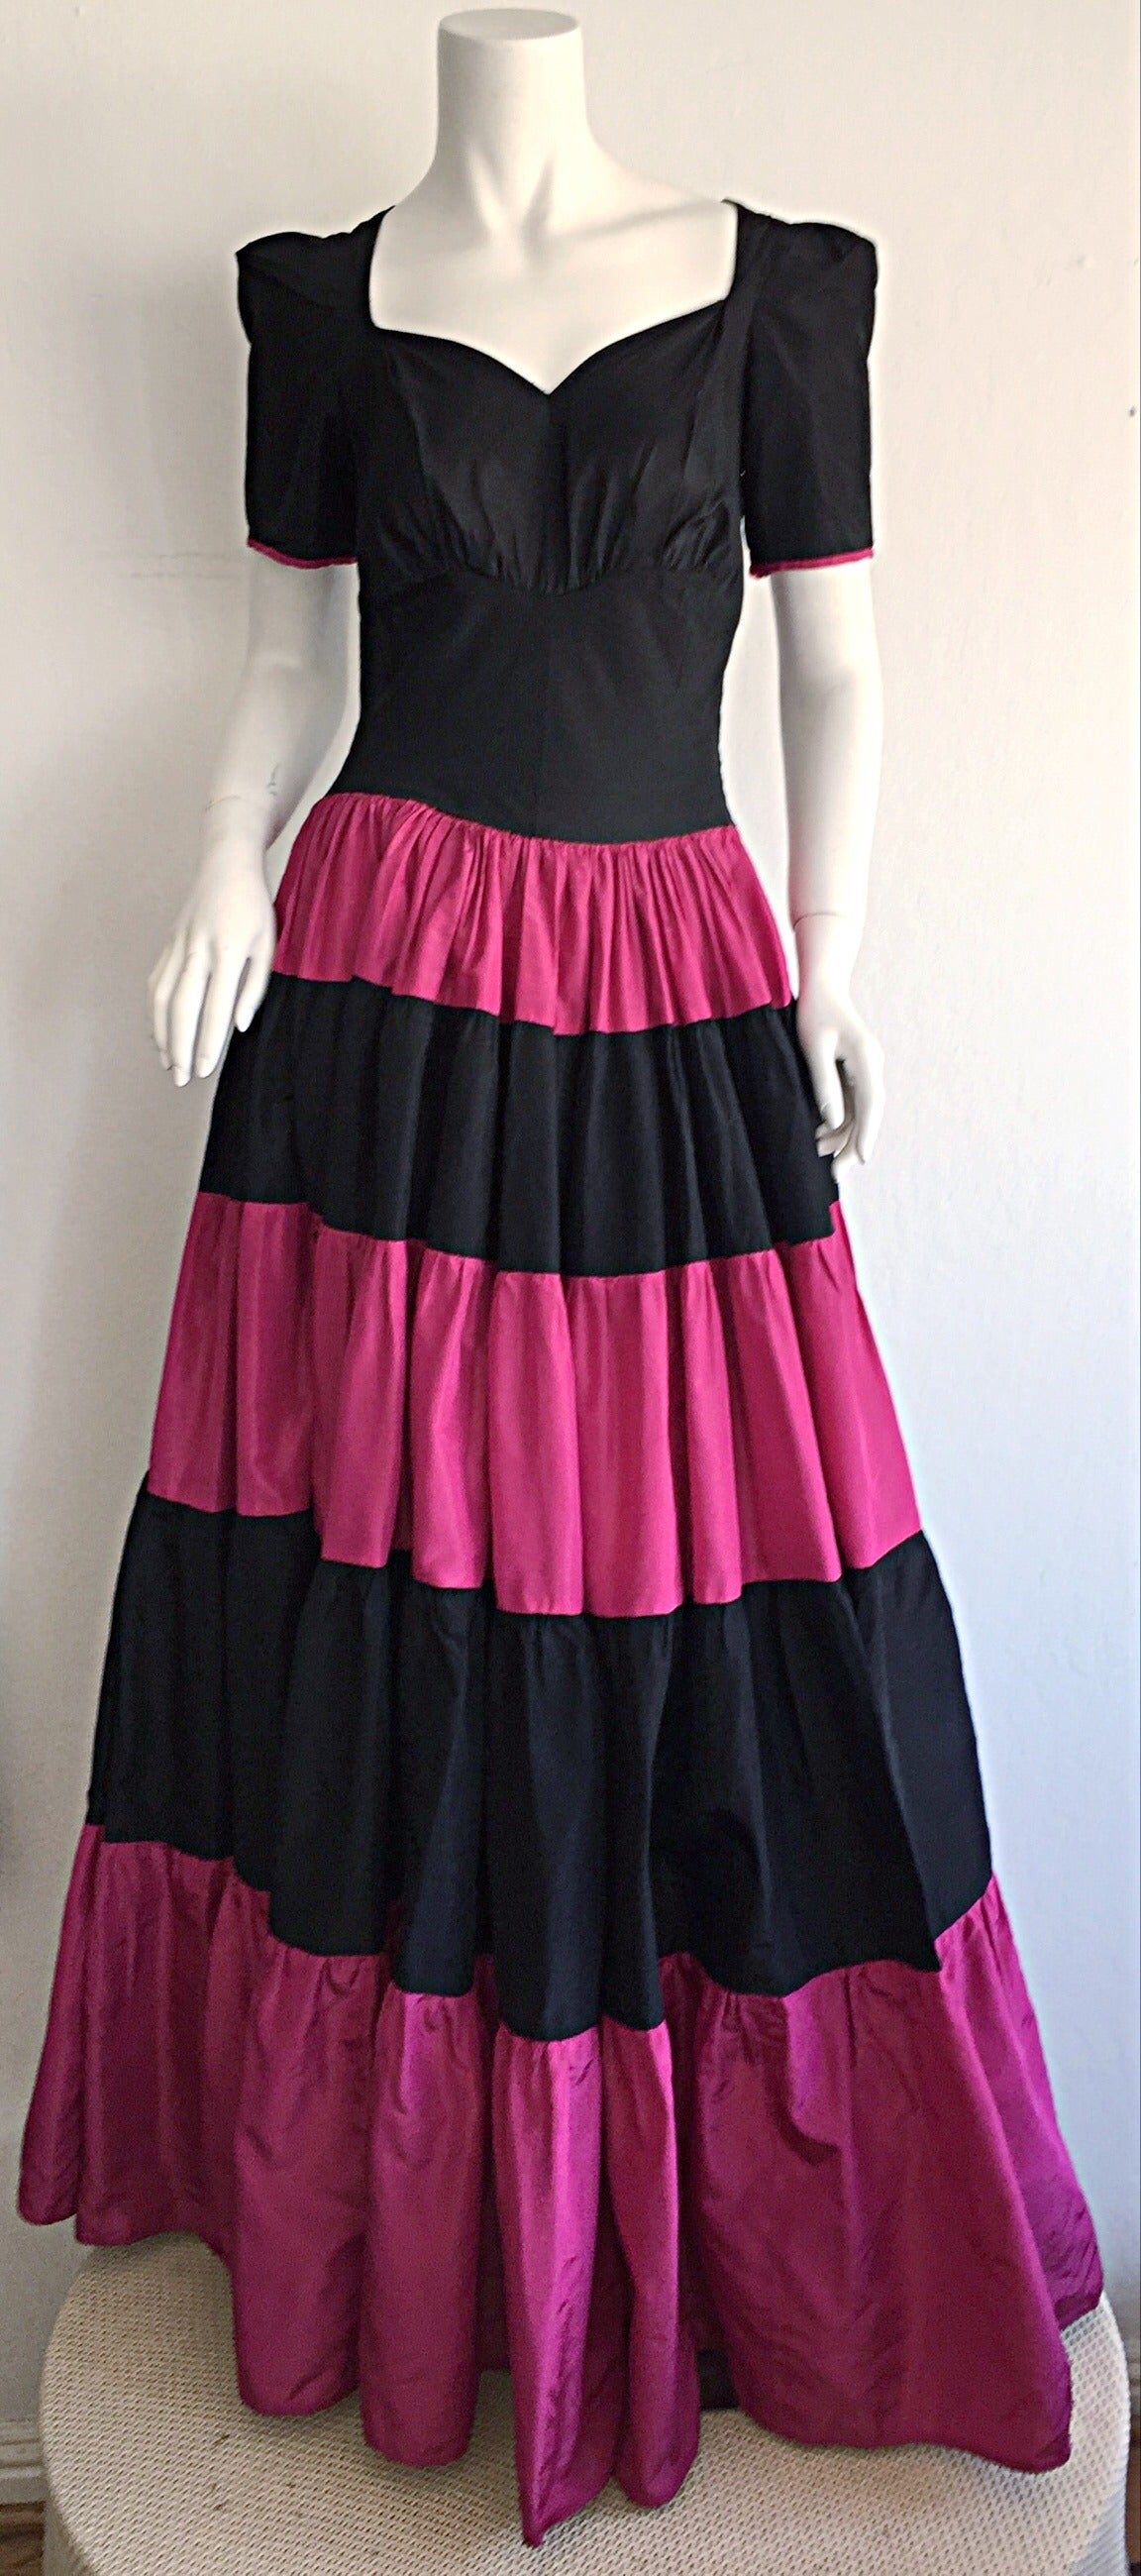 Now, here is a chance to own a piece of fashion history! Drop dead gorgeous 1950s Hattie Carnegie silk taffeta gown! Black and vibrant pink stripes on skirt. Black bodice, with matching pink trim at arm cuffs. Wonderful full skirt, with a flattering